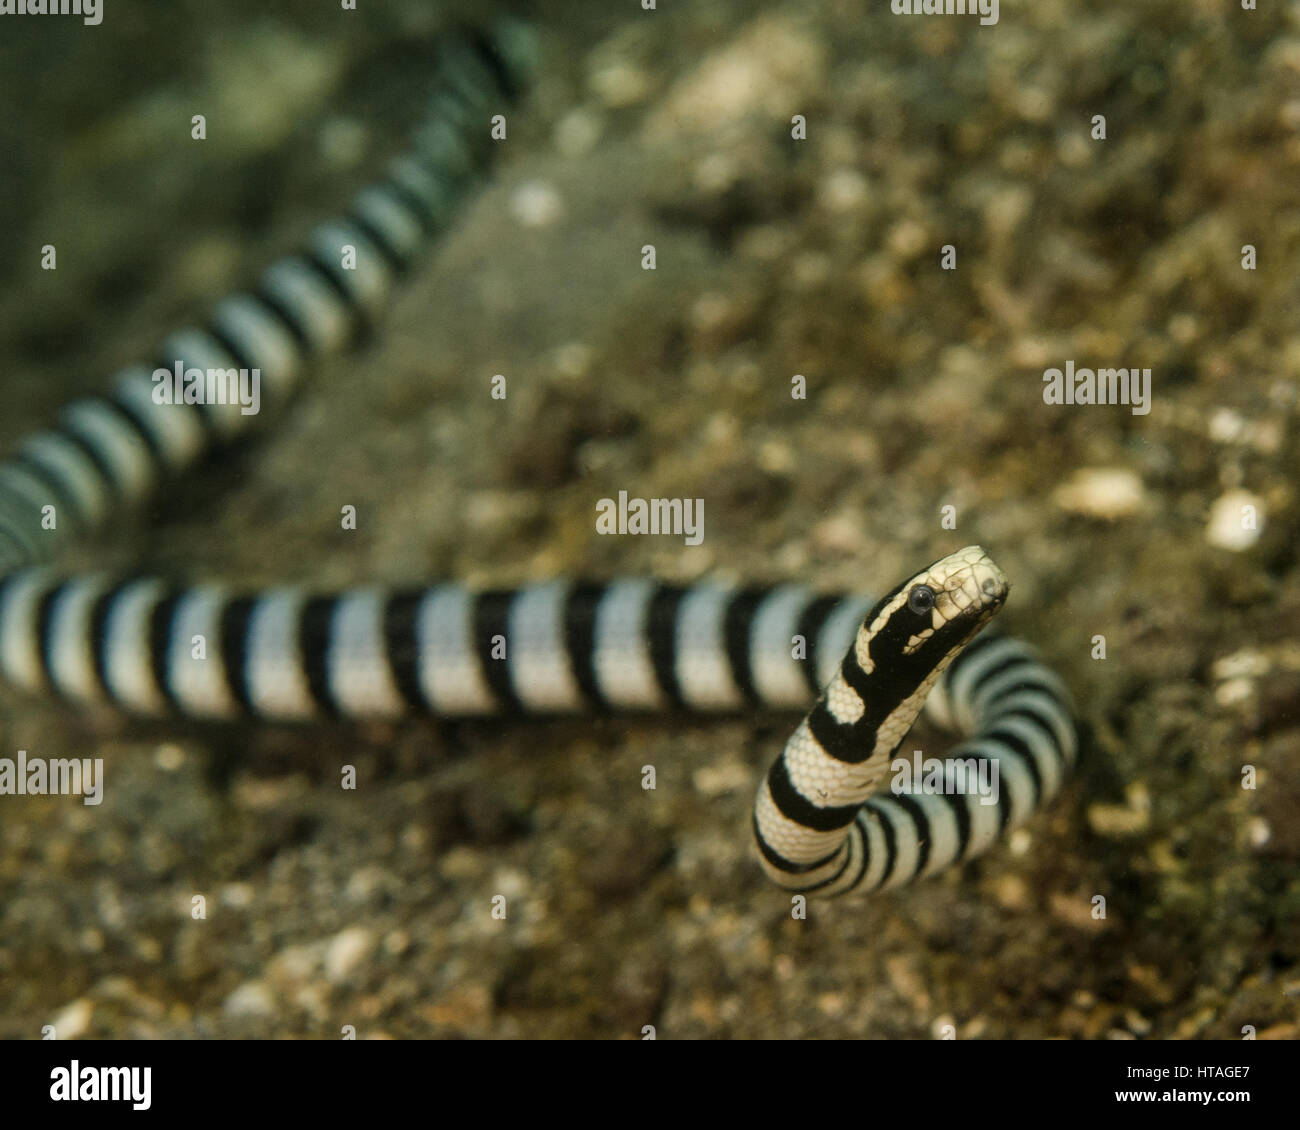 Banded Sea Snake in Indonesia Stock Photo